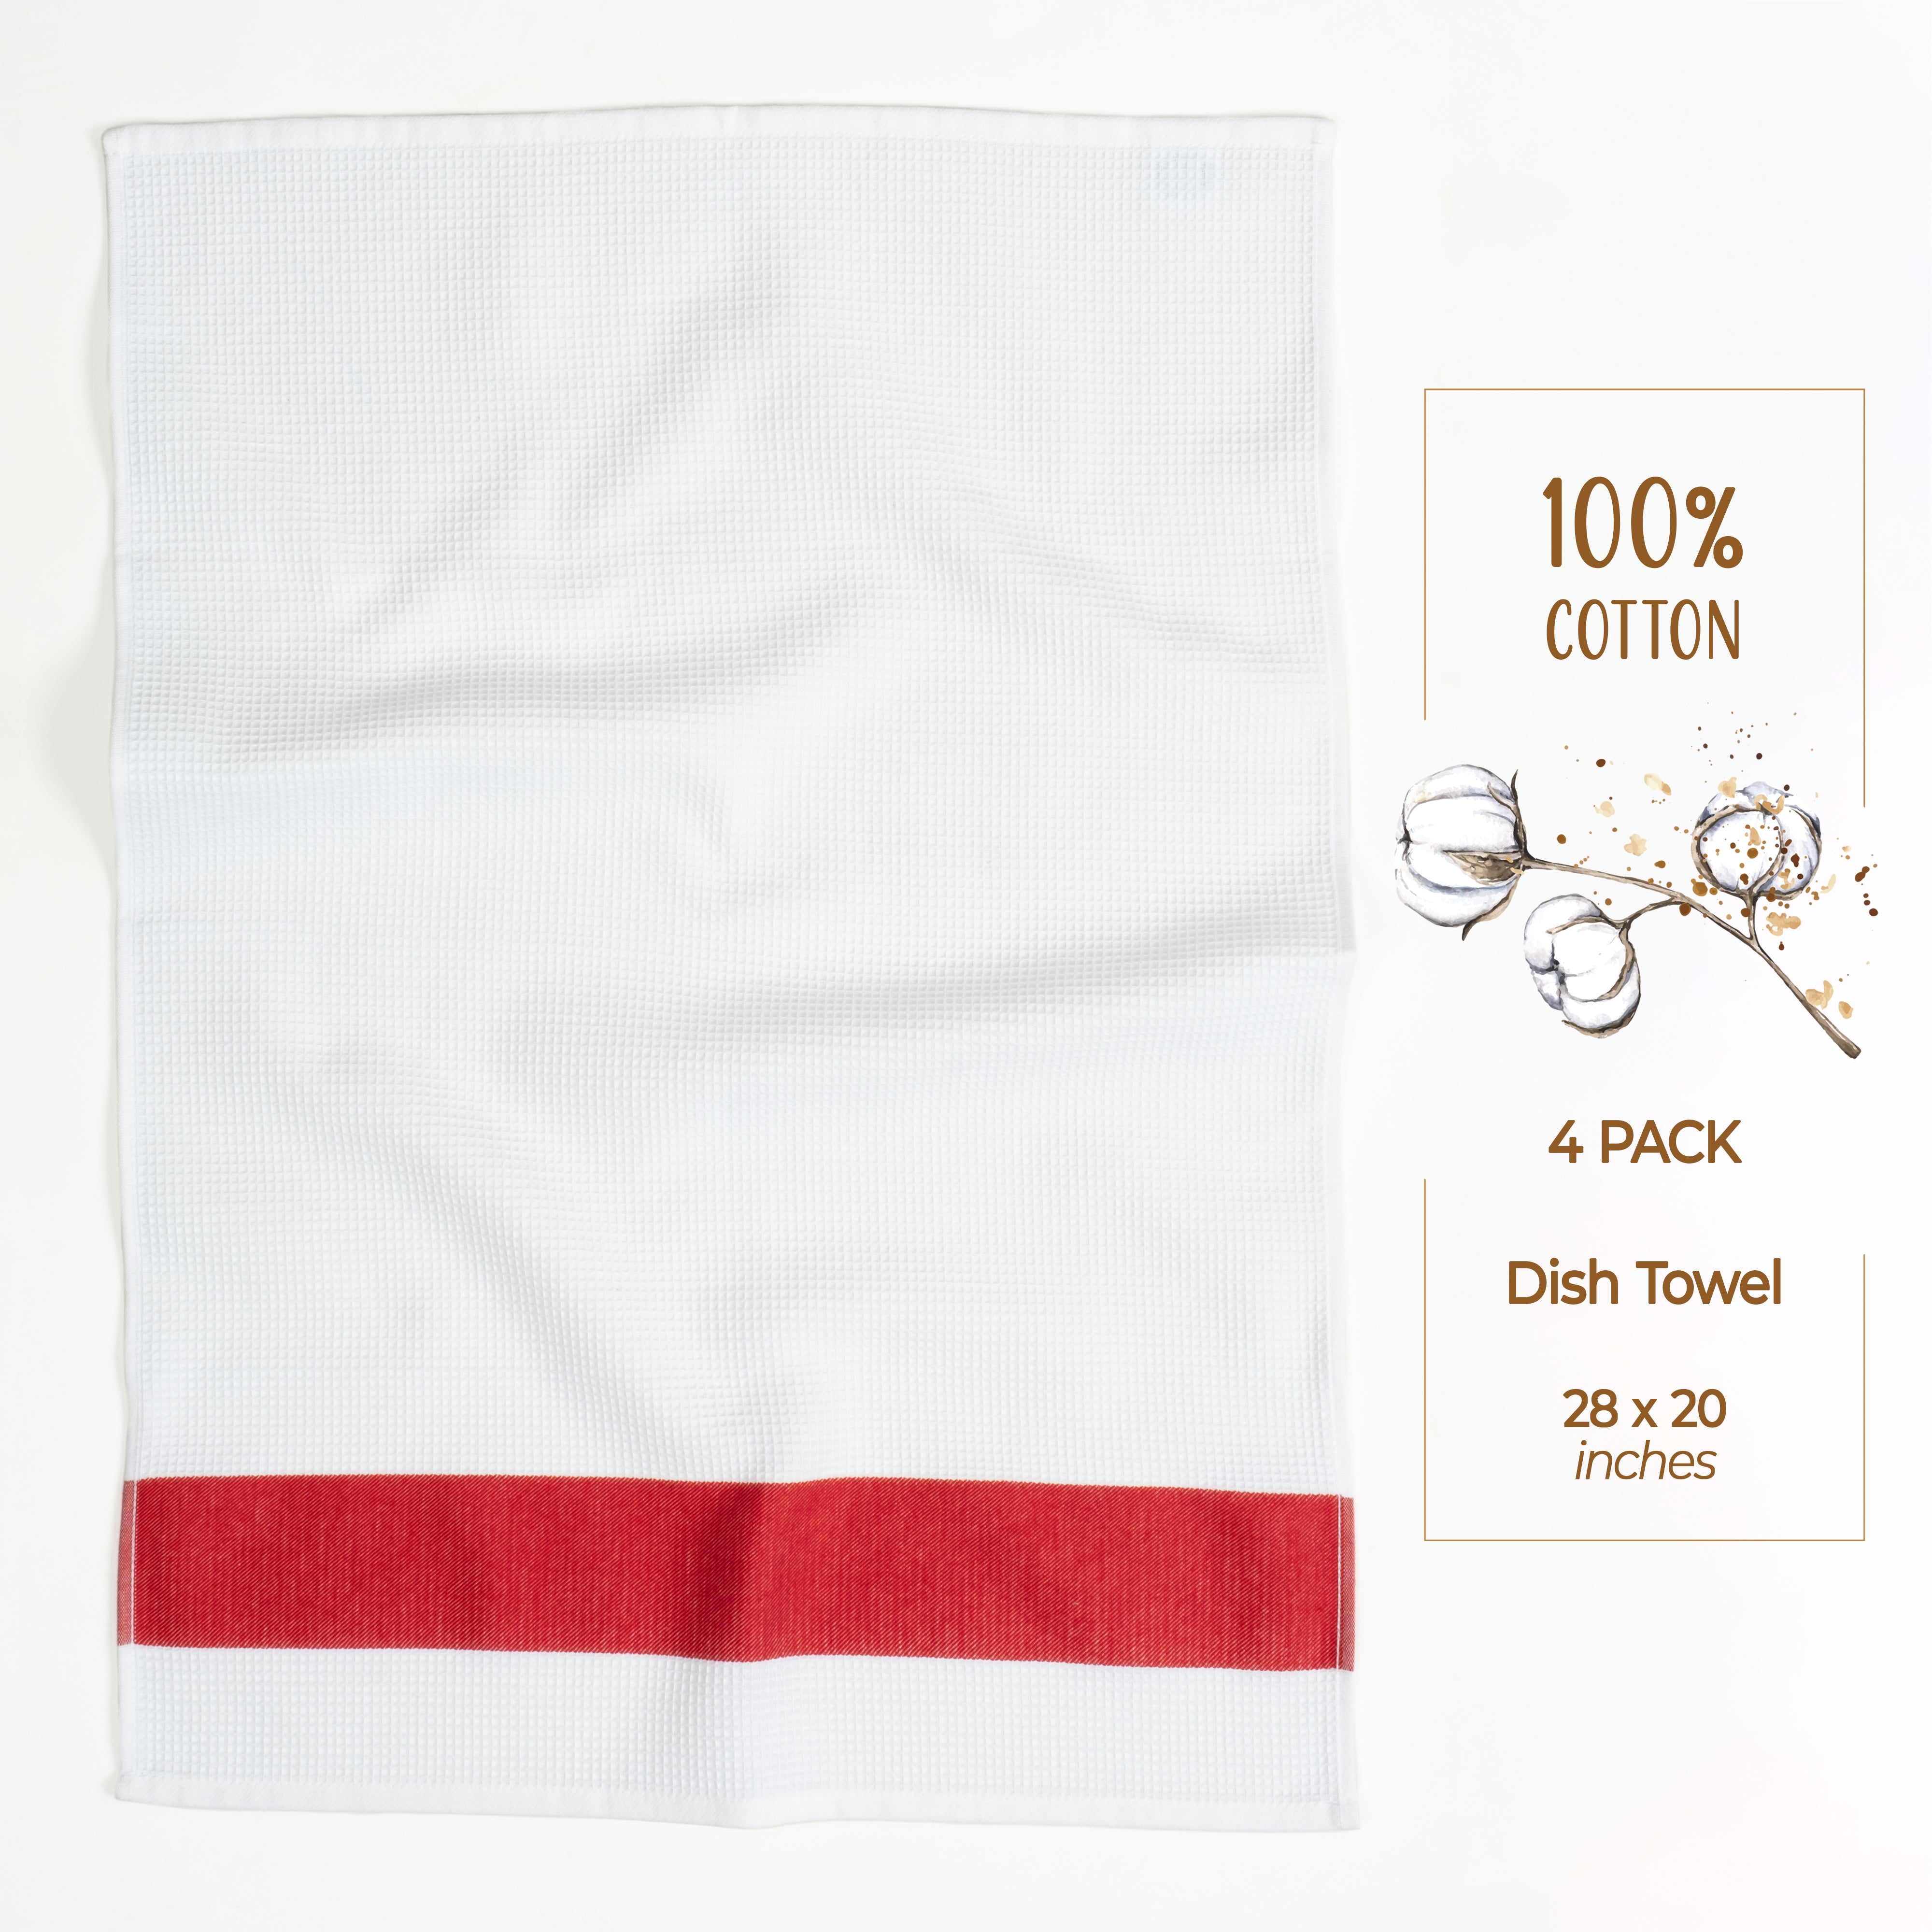 American Soft Linen 4 Packed Dish Towels, 100% Cotton Dish Cloths for Kitchen red-3